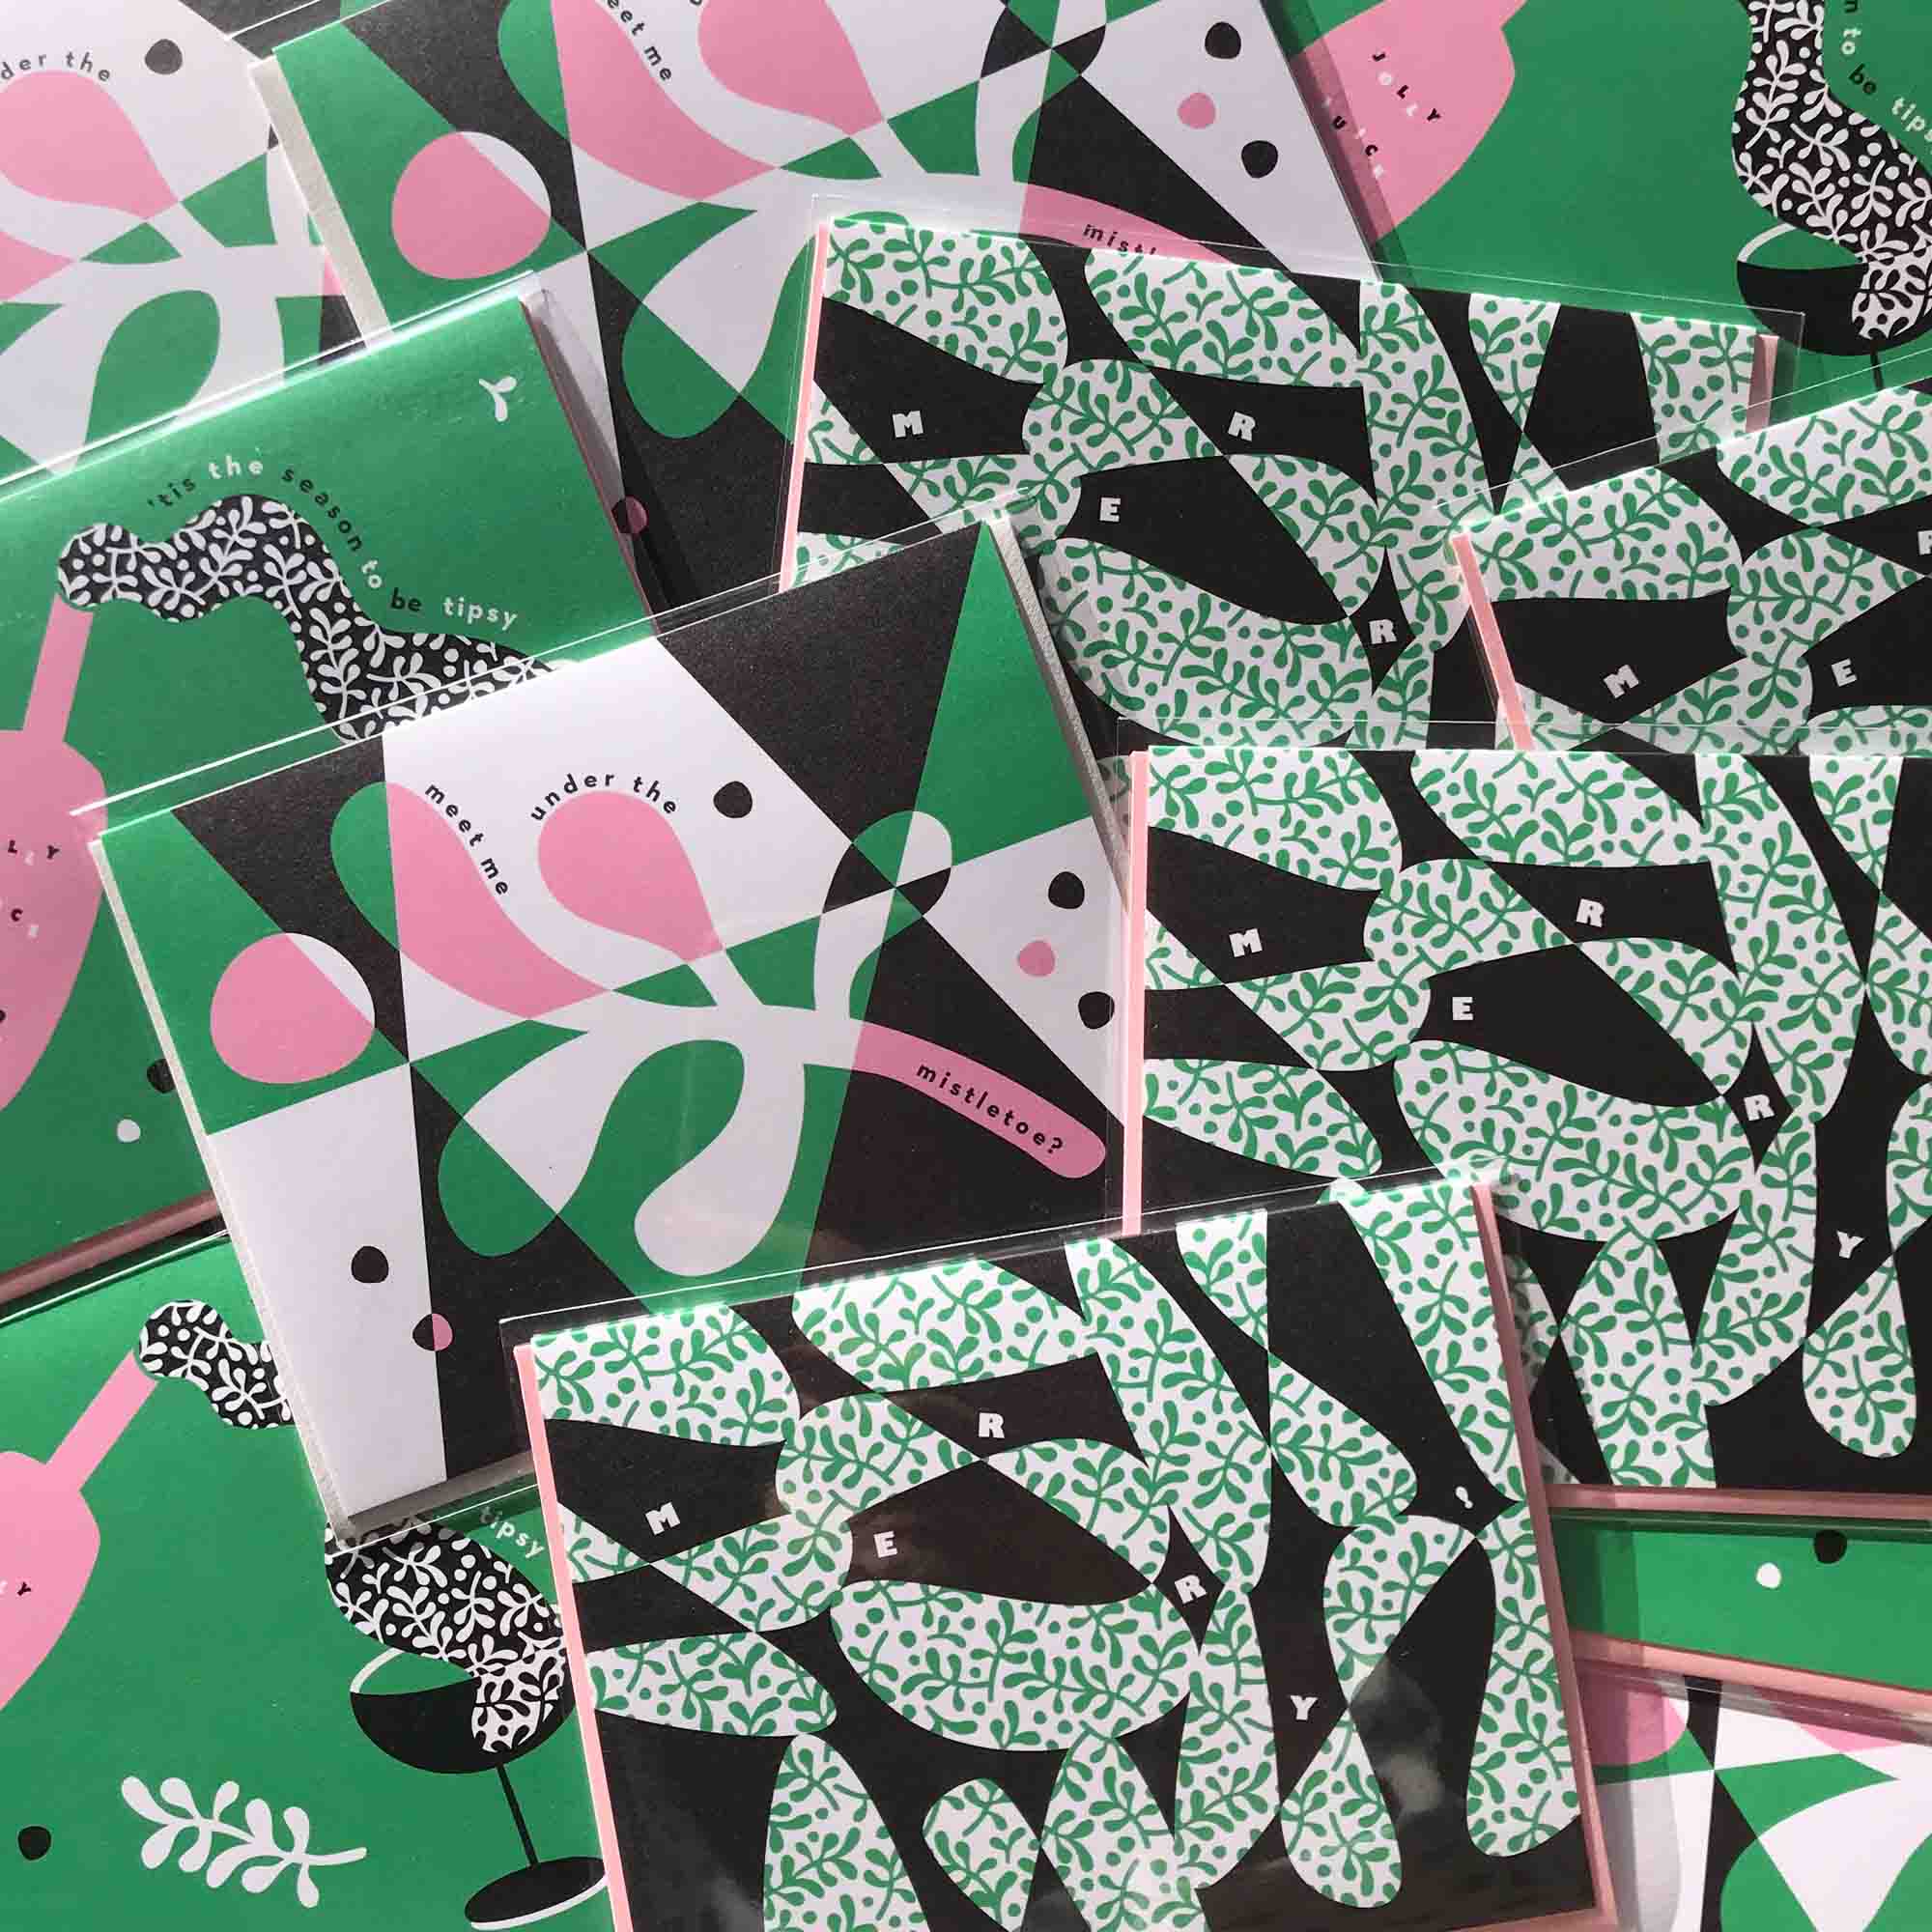 A pile of pink and green retro, mid-century inspired holiday cards by @mydarlin_bk